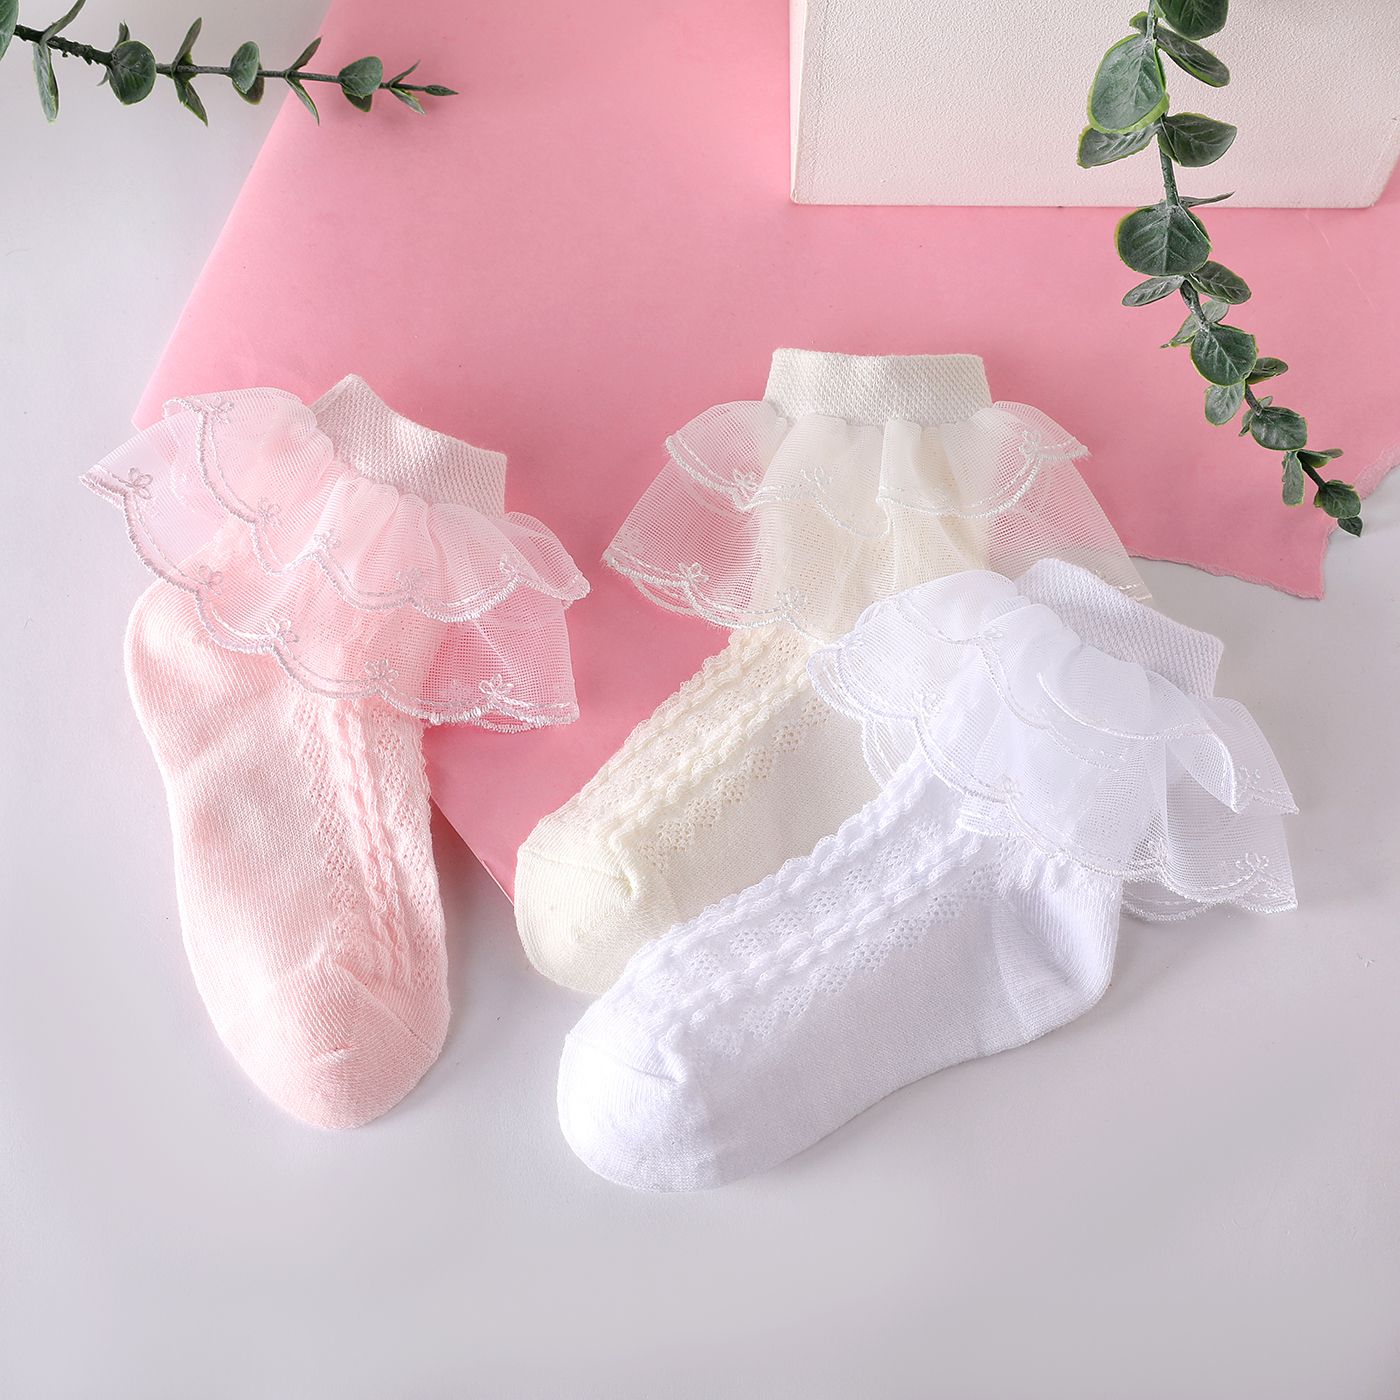 3 Pairs Baby / Toddler / Kid Solid Lace Trim Socks